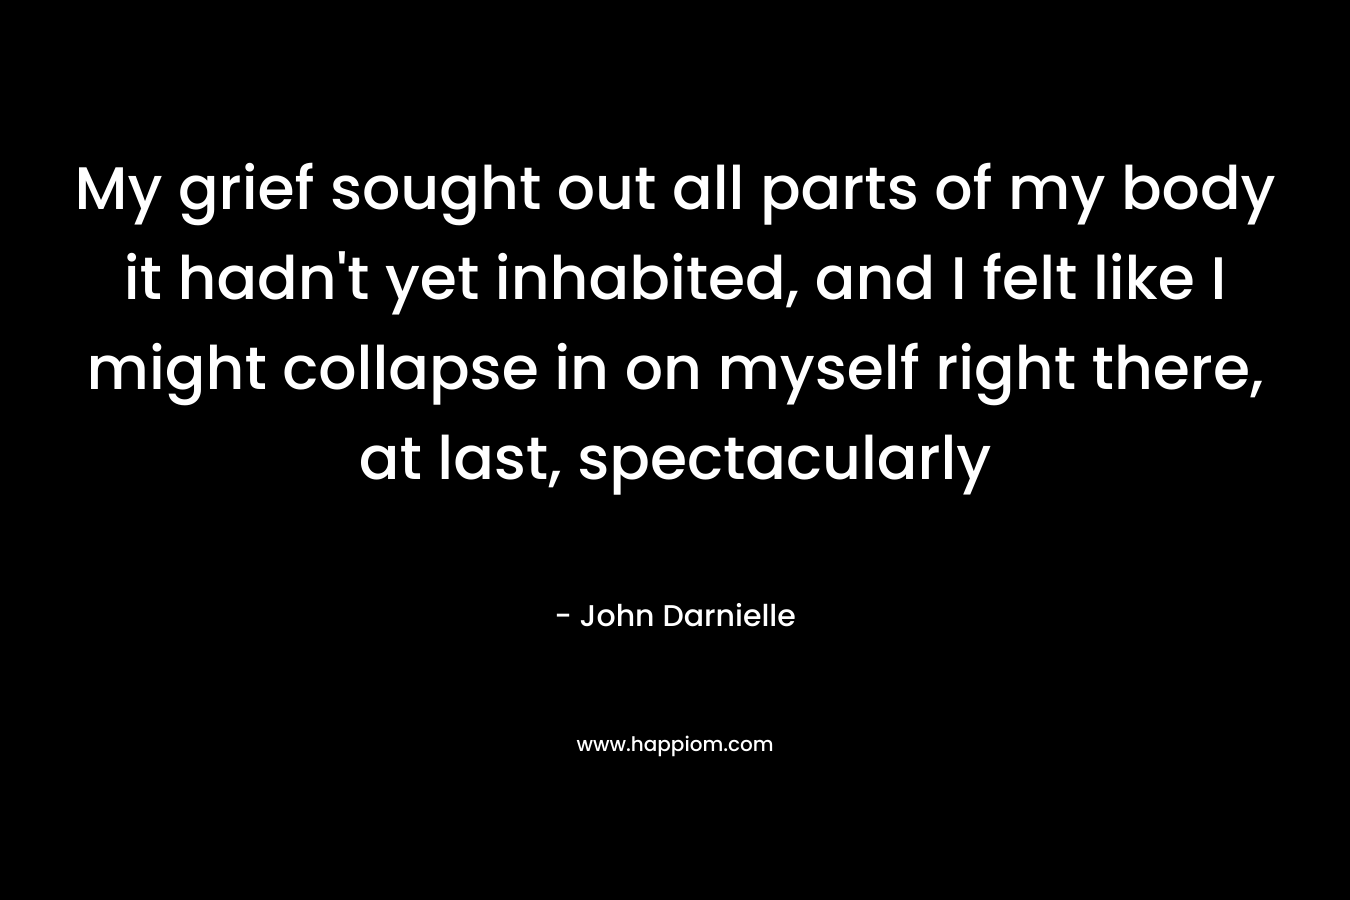 My grief sought out all parts of my body it hadn’t yet inhabited, and I felt like I might collapse in on myself right there, at last, spectacularly – John Darnielle